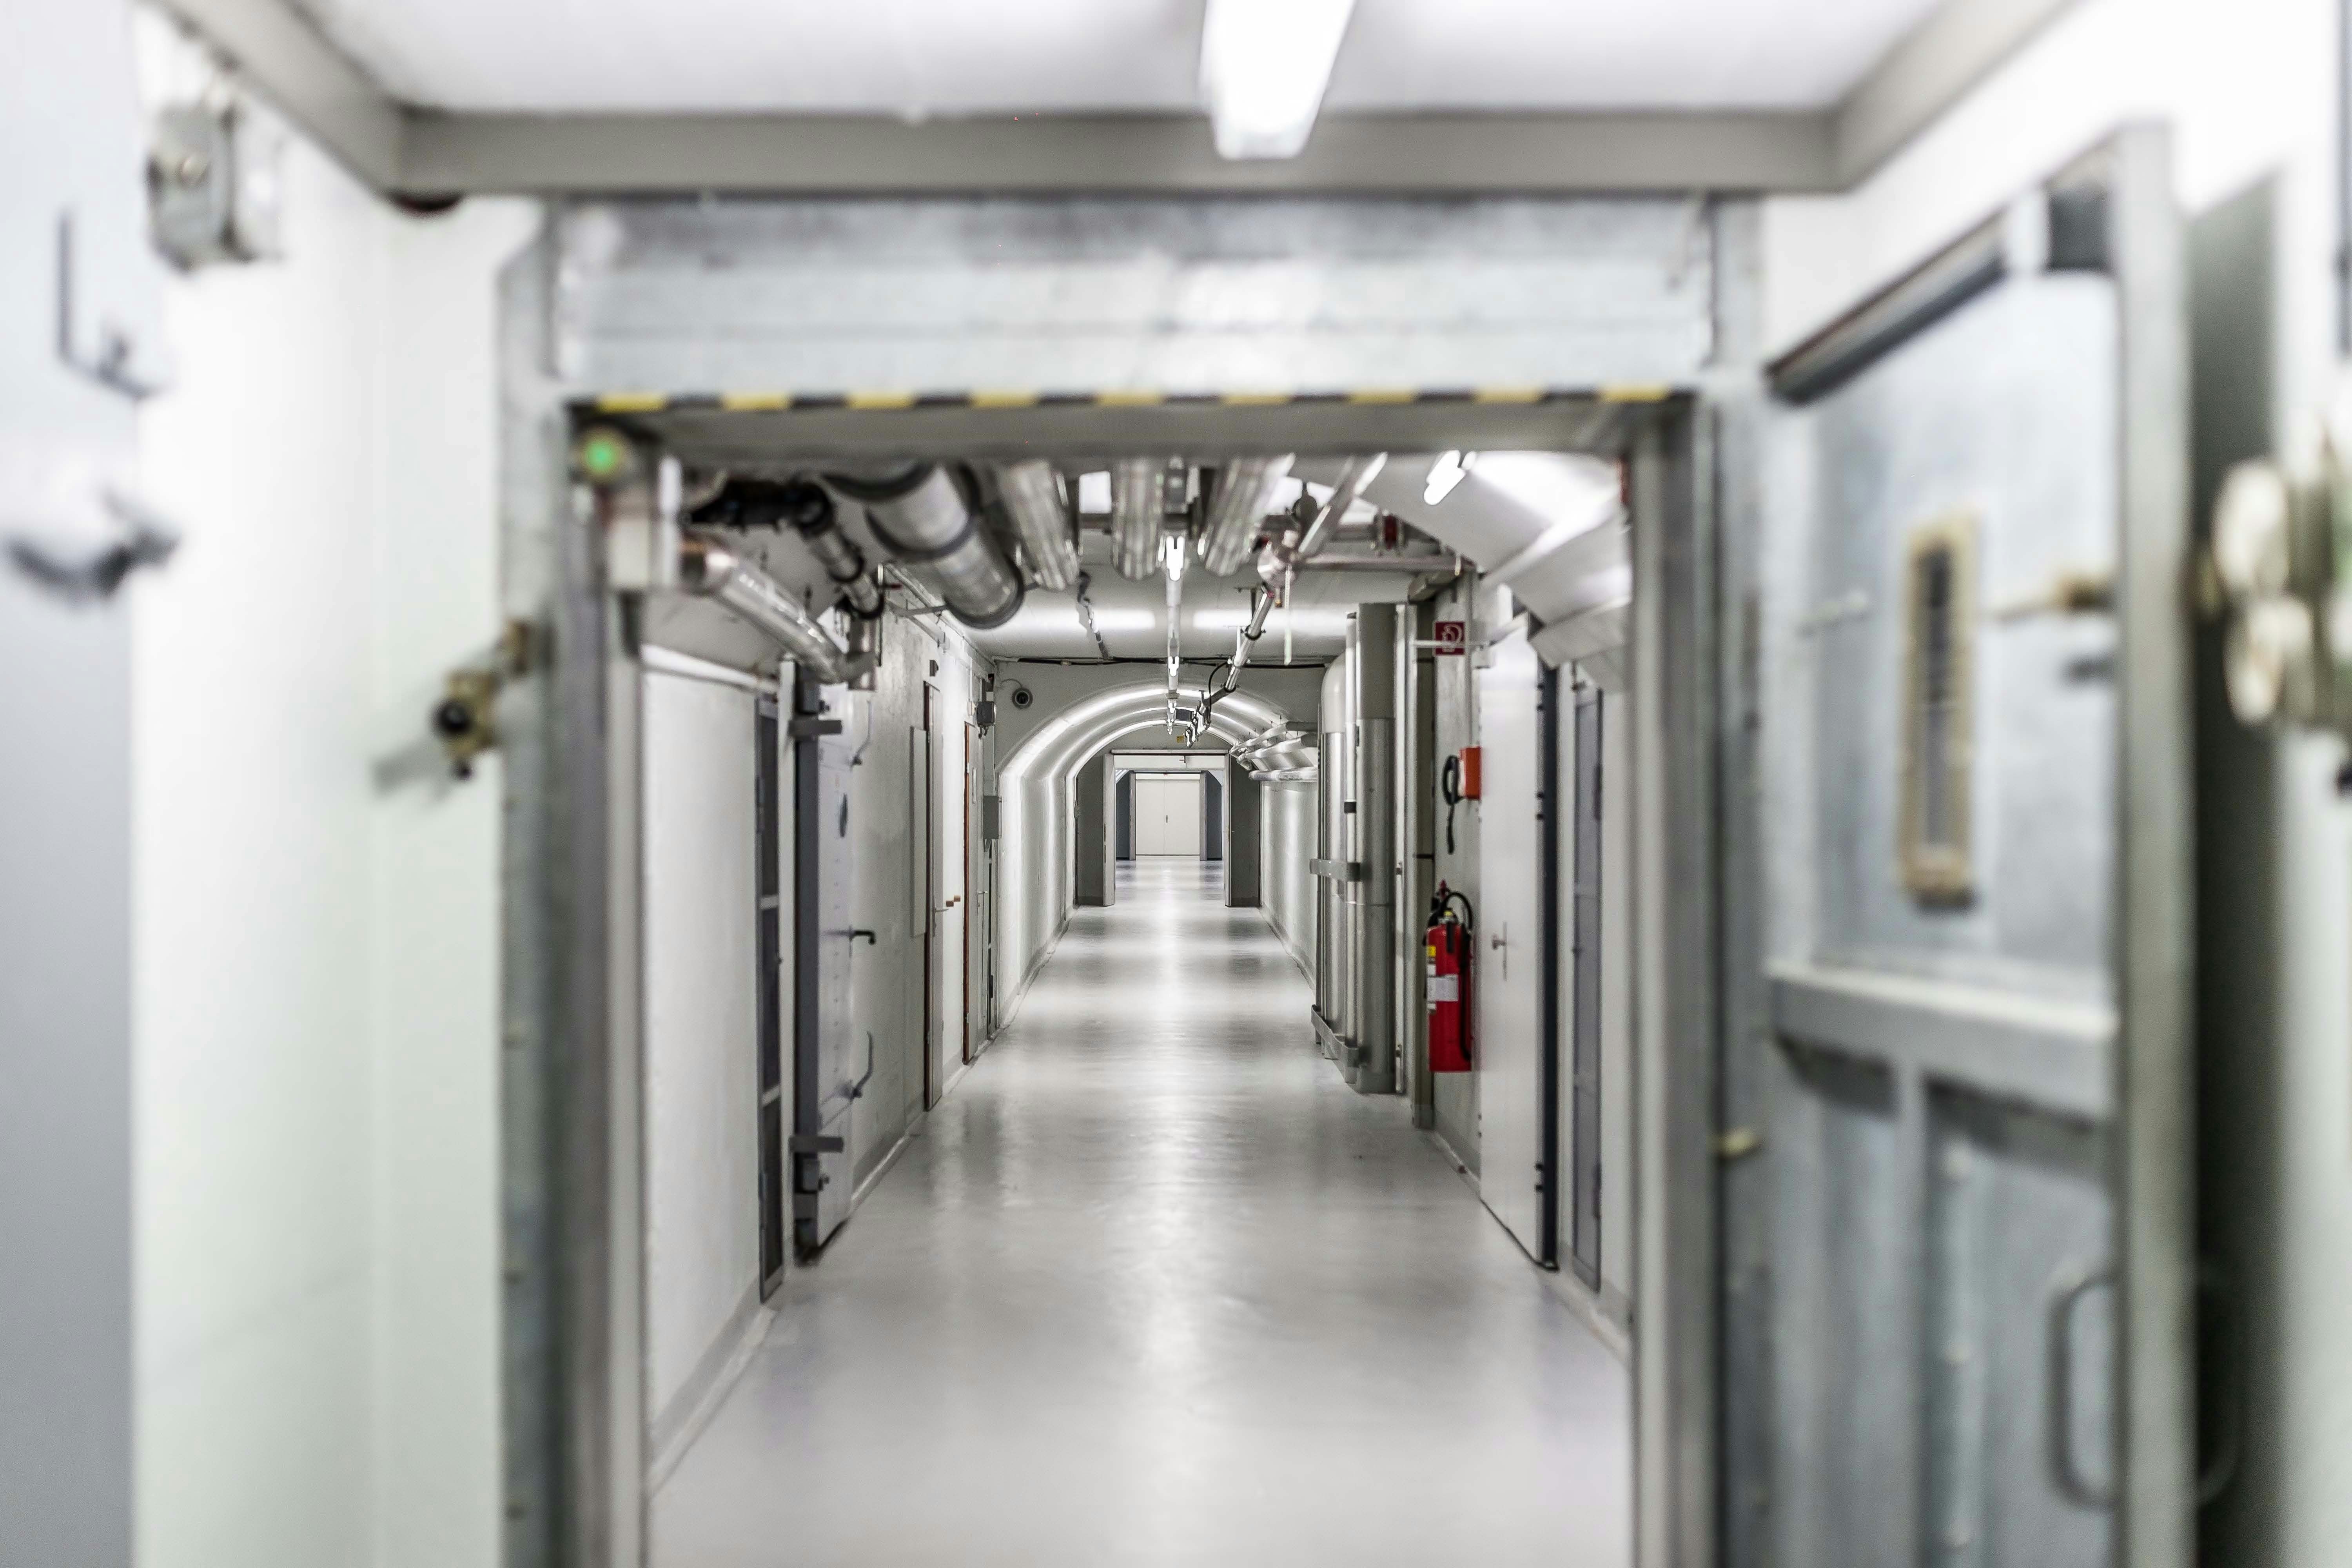 Inside the nuclear bunker for sale. Image by Griffiths Eccles